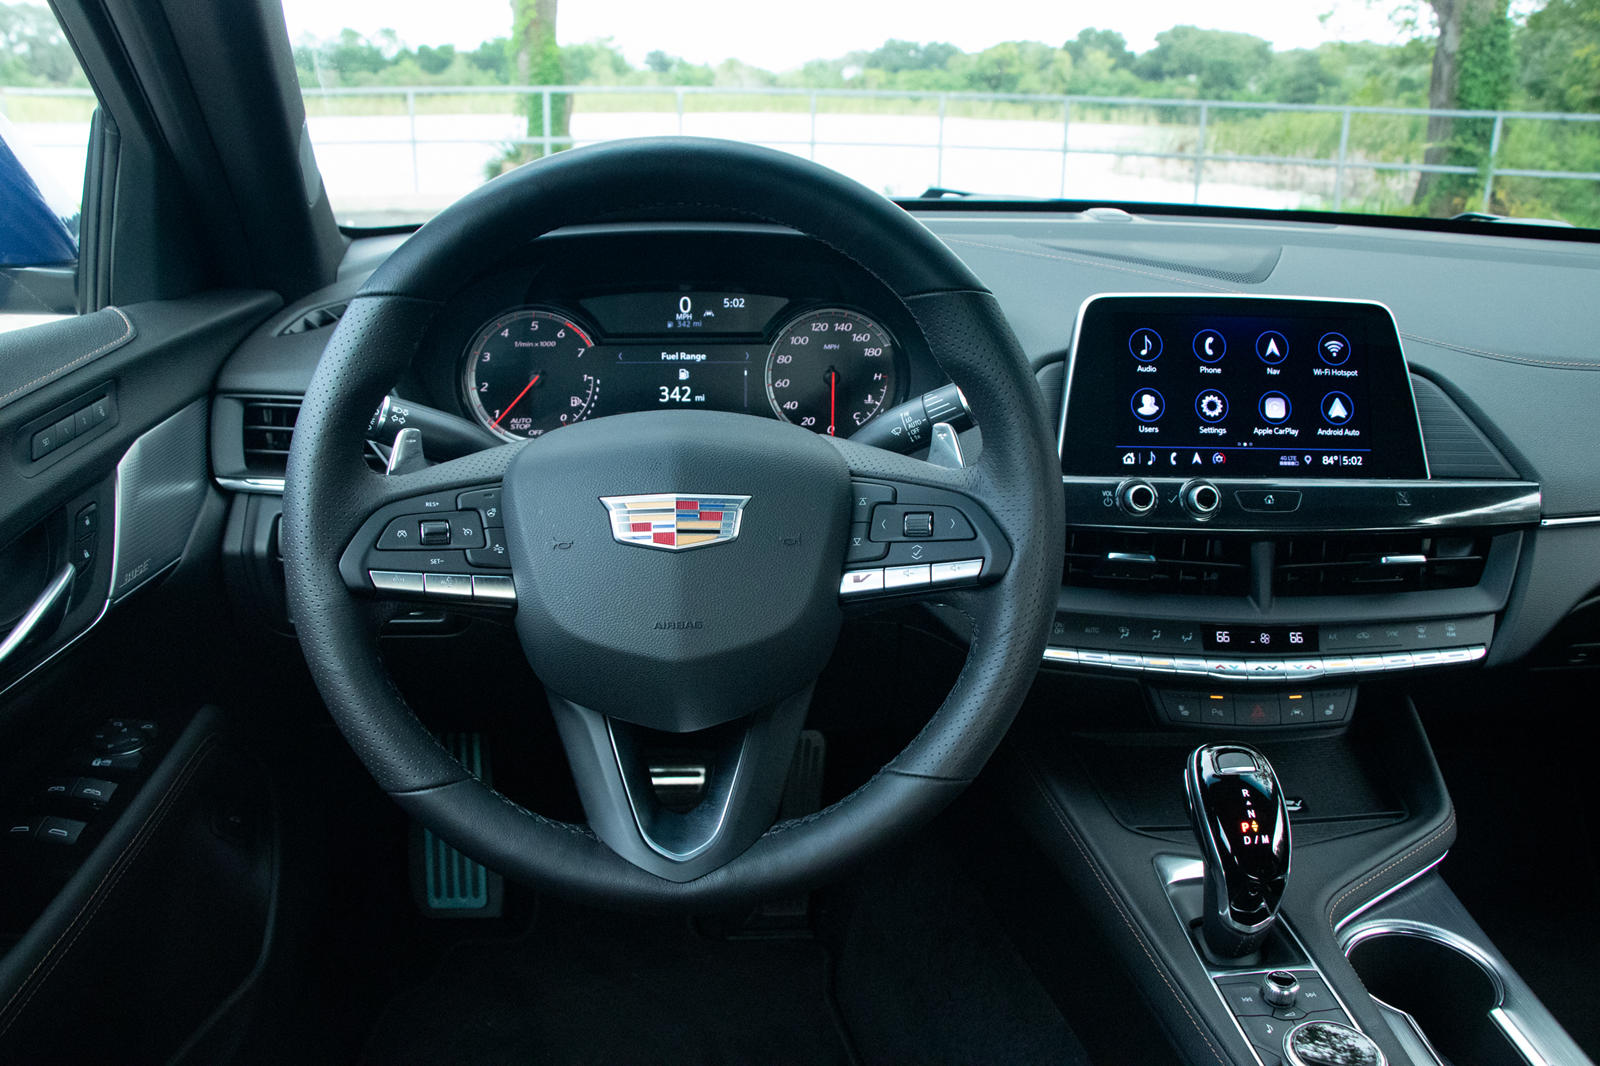 2022 Cadillac CT4-V Interior Dimensions: Seating, Cargo Space & Trunk Size  - Photos | CarBuzz